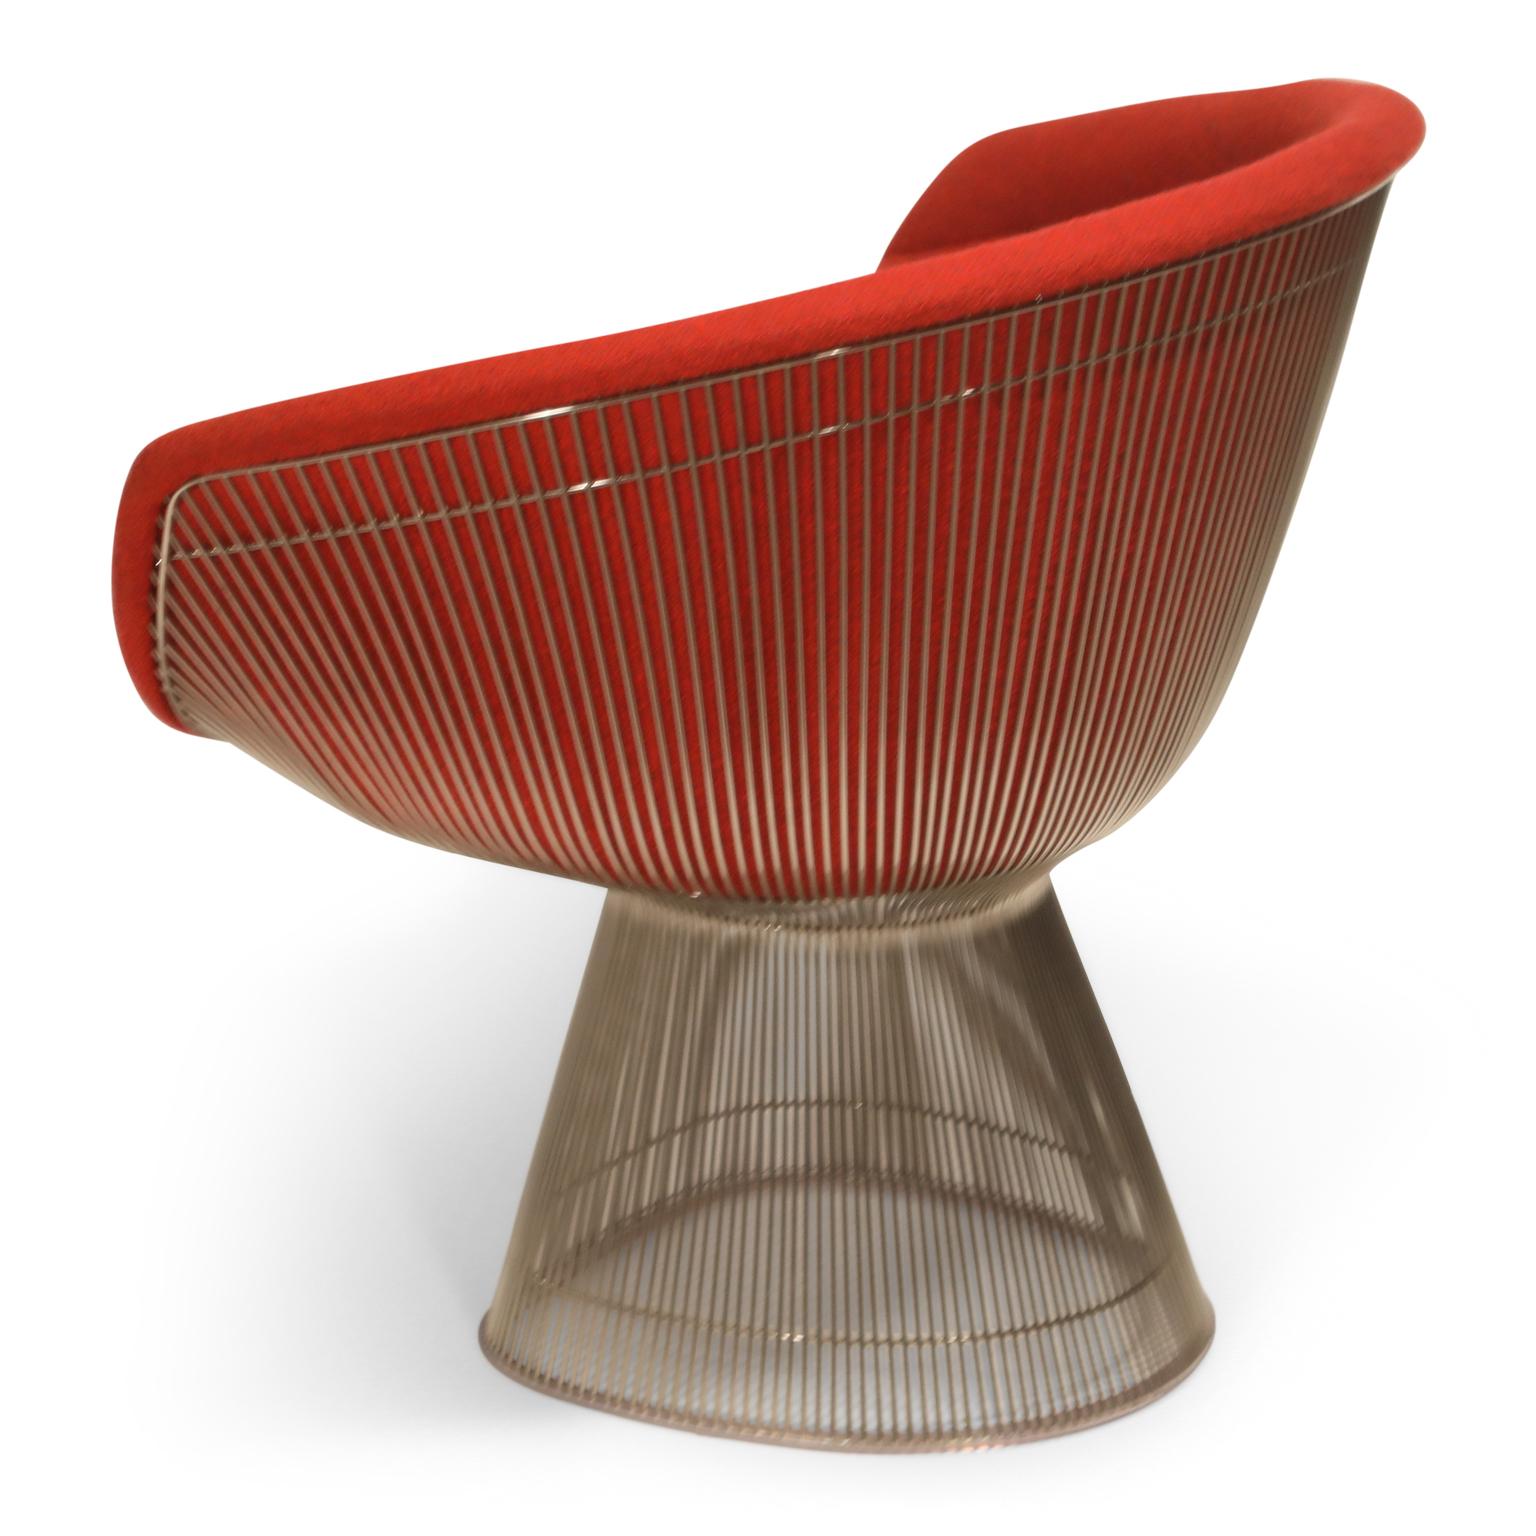 Nickel Warren Platner for Knoll Lounge Chairs in Red Wool Boucle